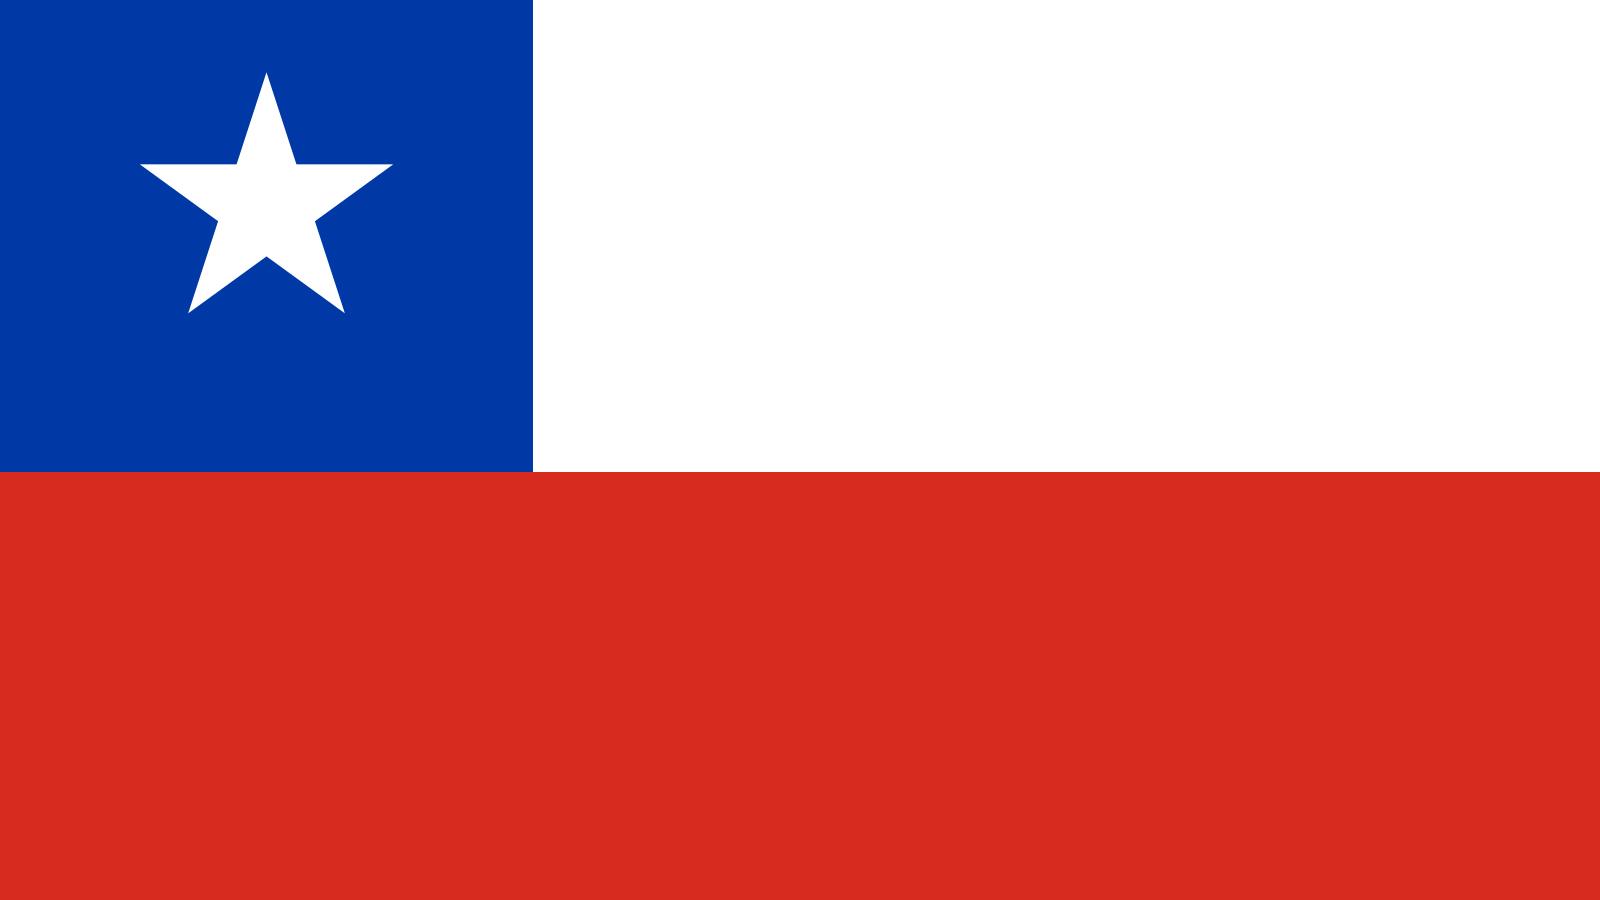 Bandiera Cile / Flag of Chile